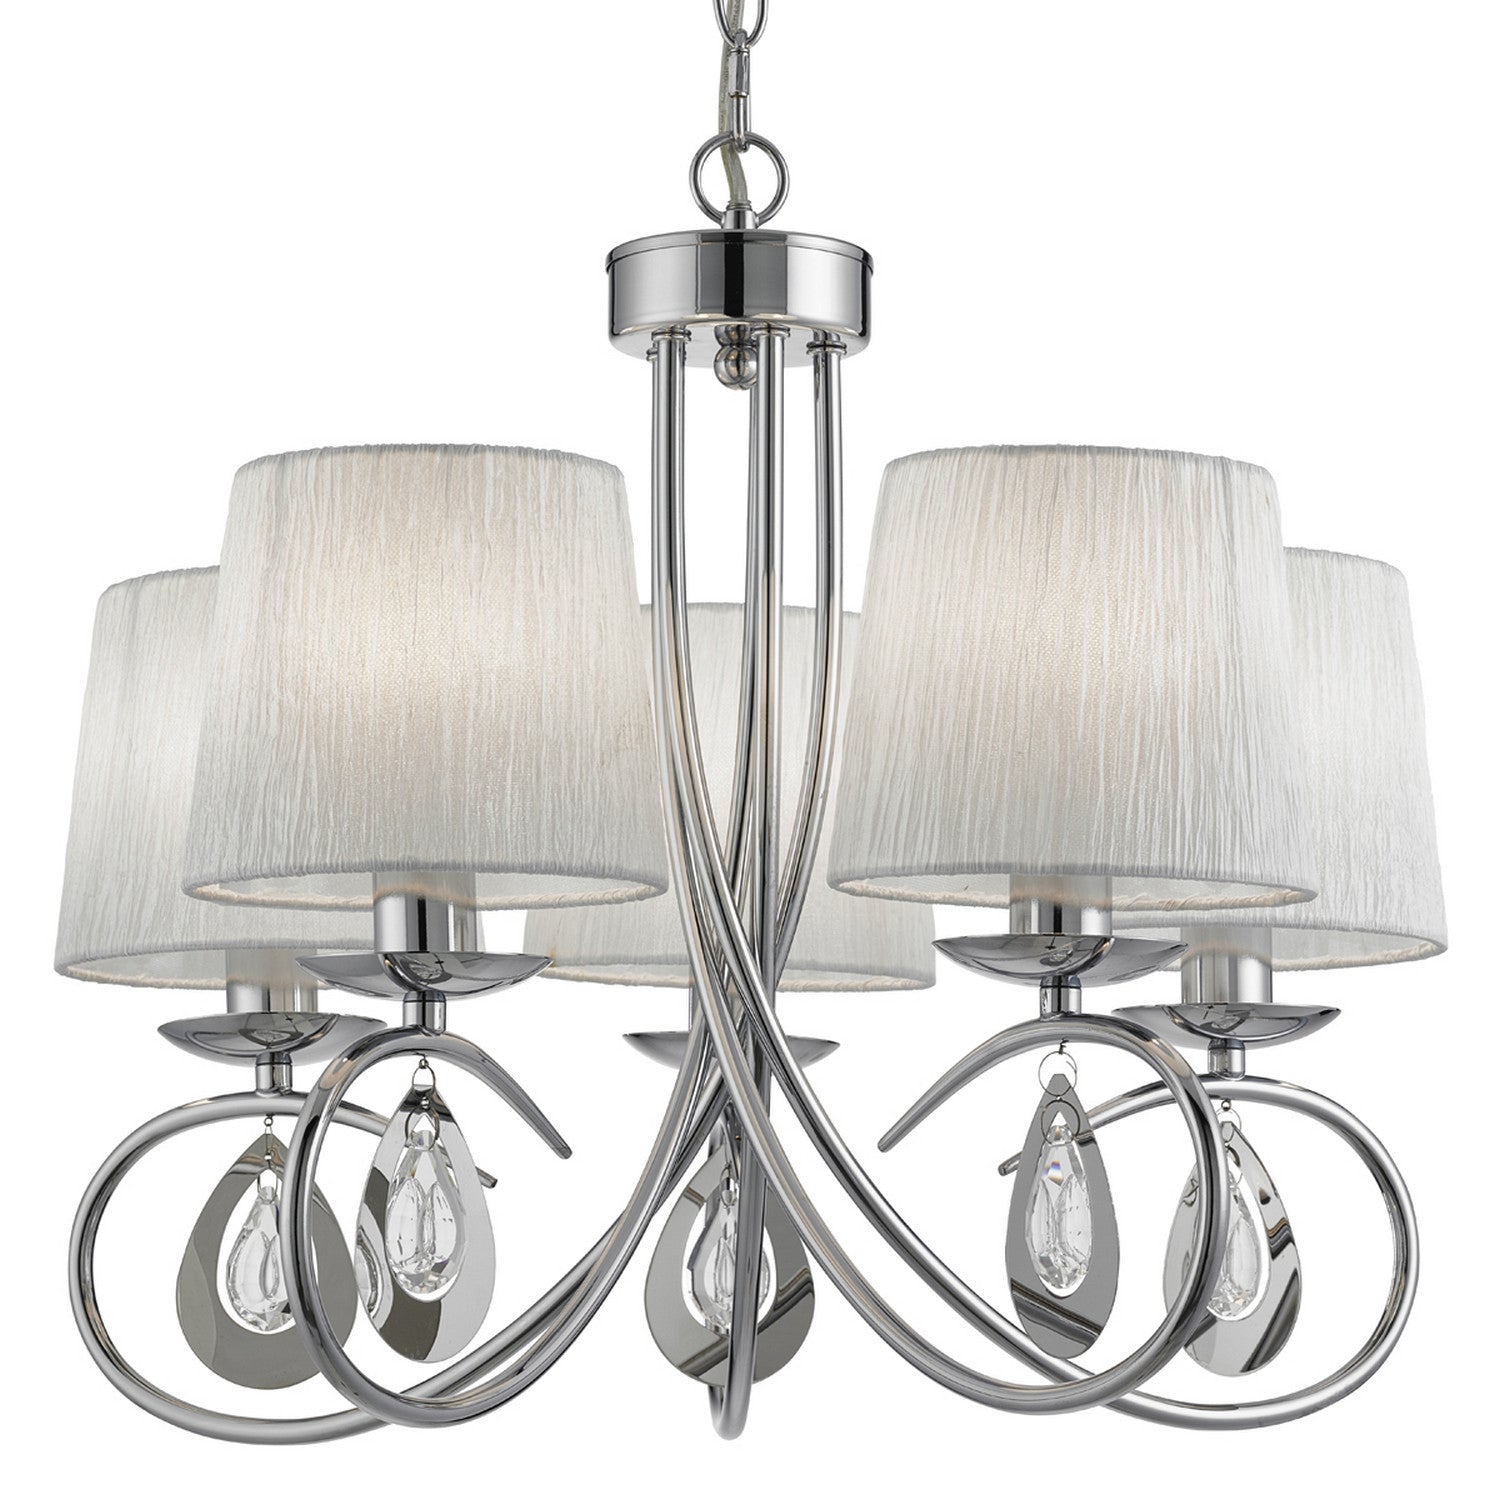 Angelique Chrome 5 Light Ceiling Fitting with Glass Pear Drop